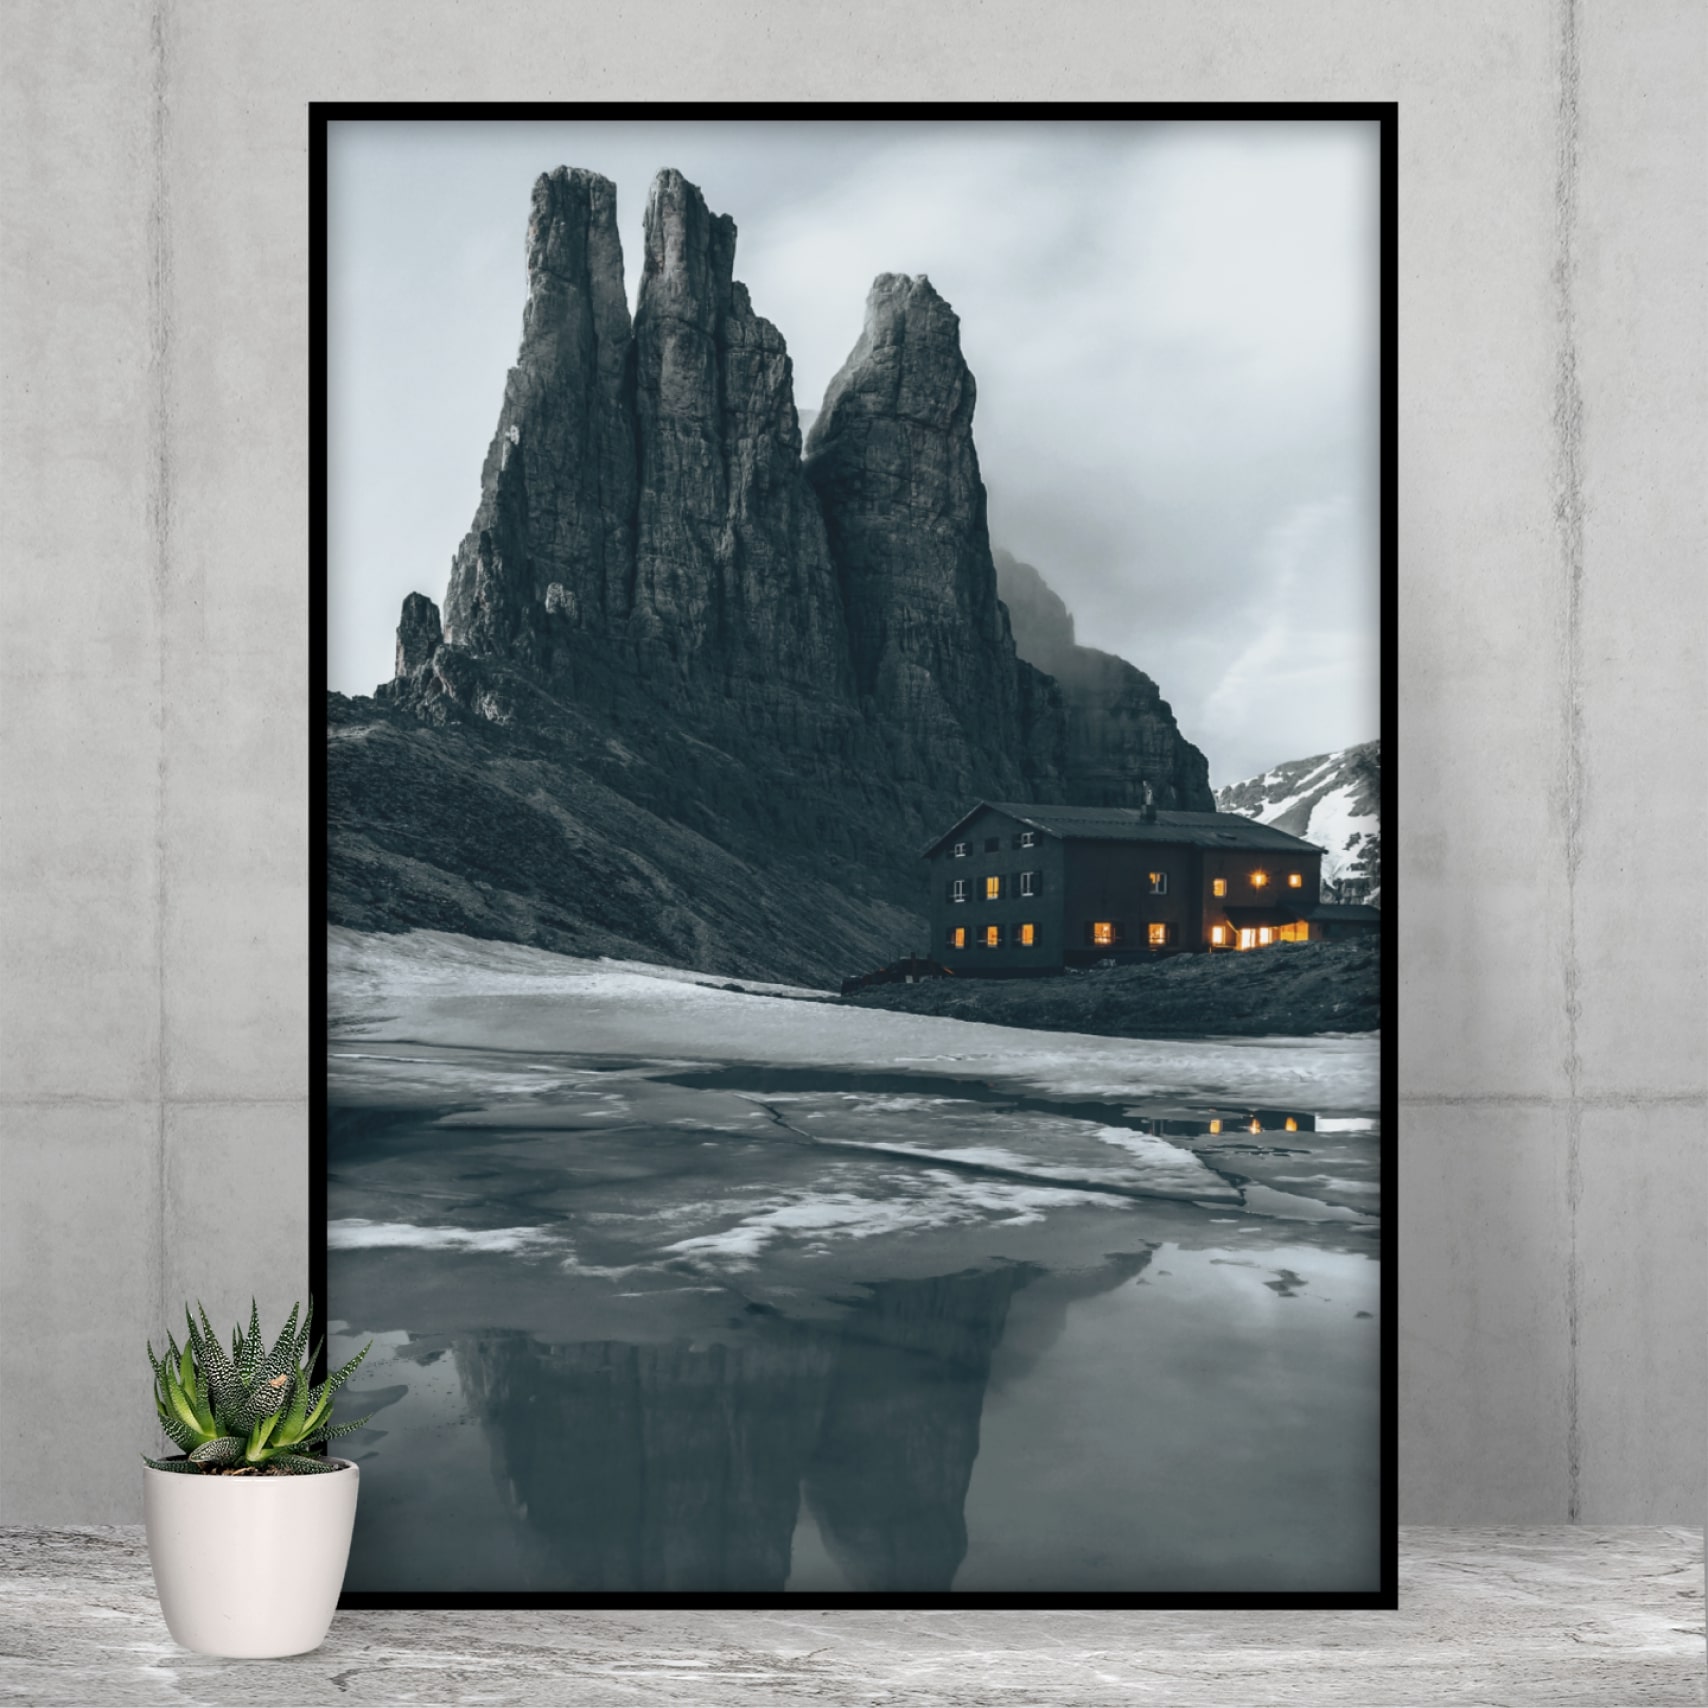 Custom printed poster with grey mountain scenery.